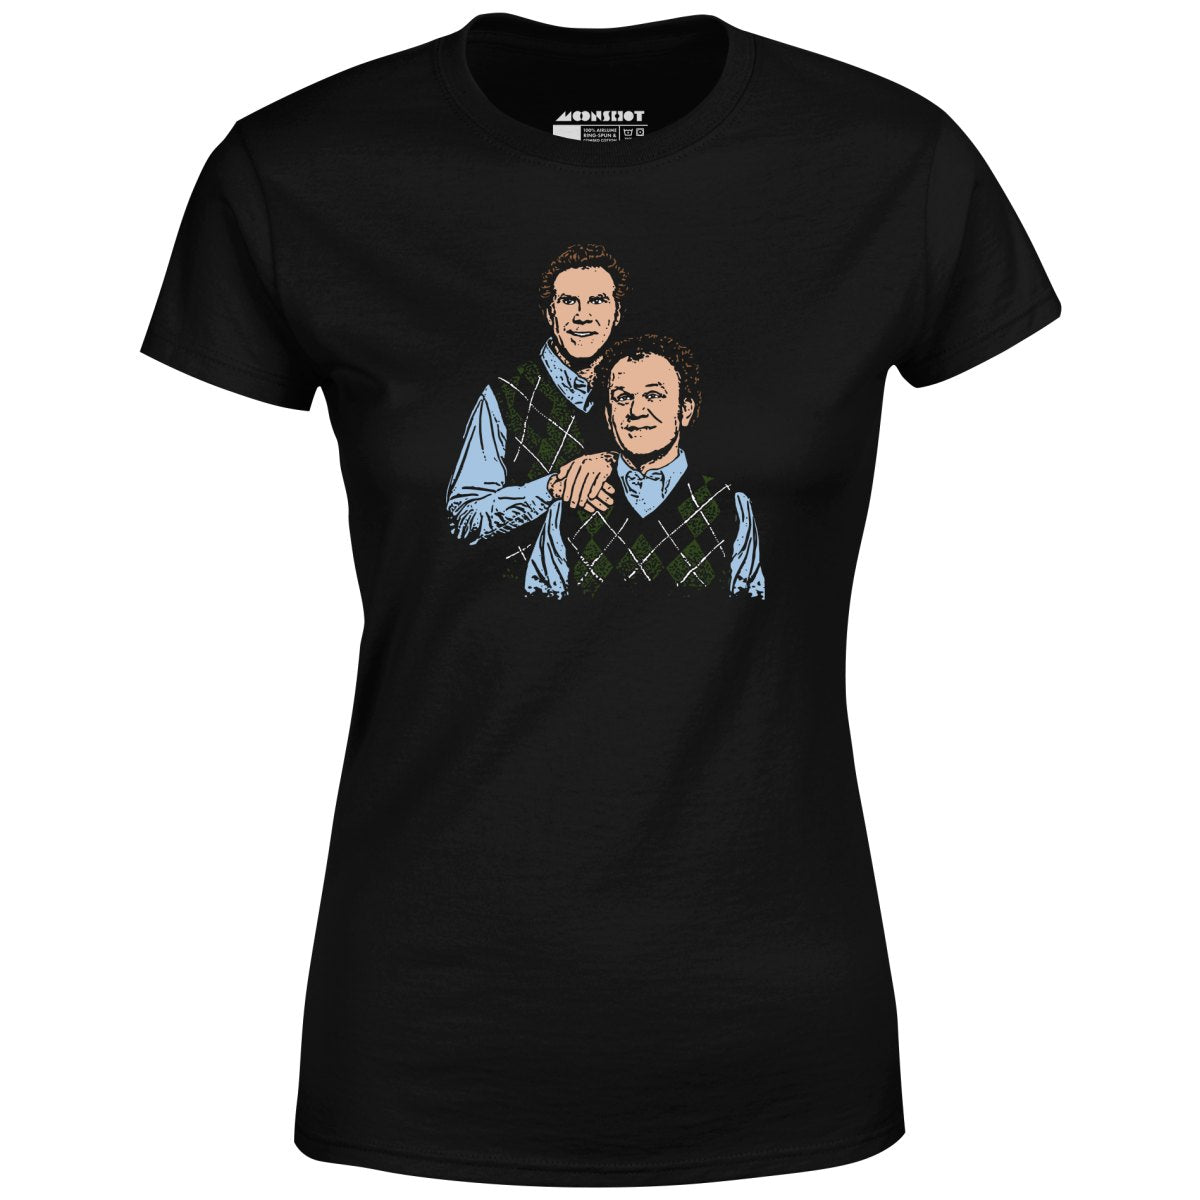 Step Brothers - Women's T-Shirt